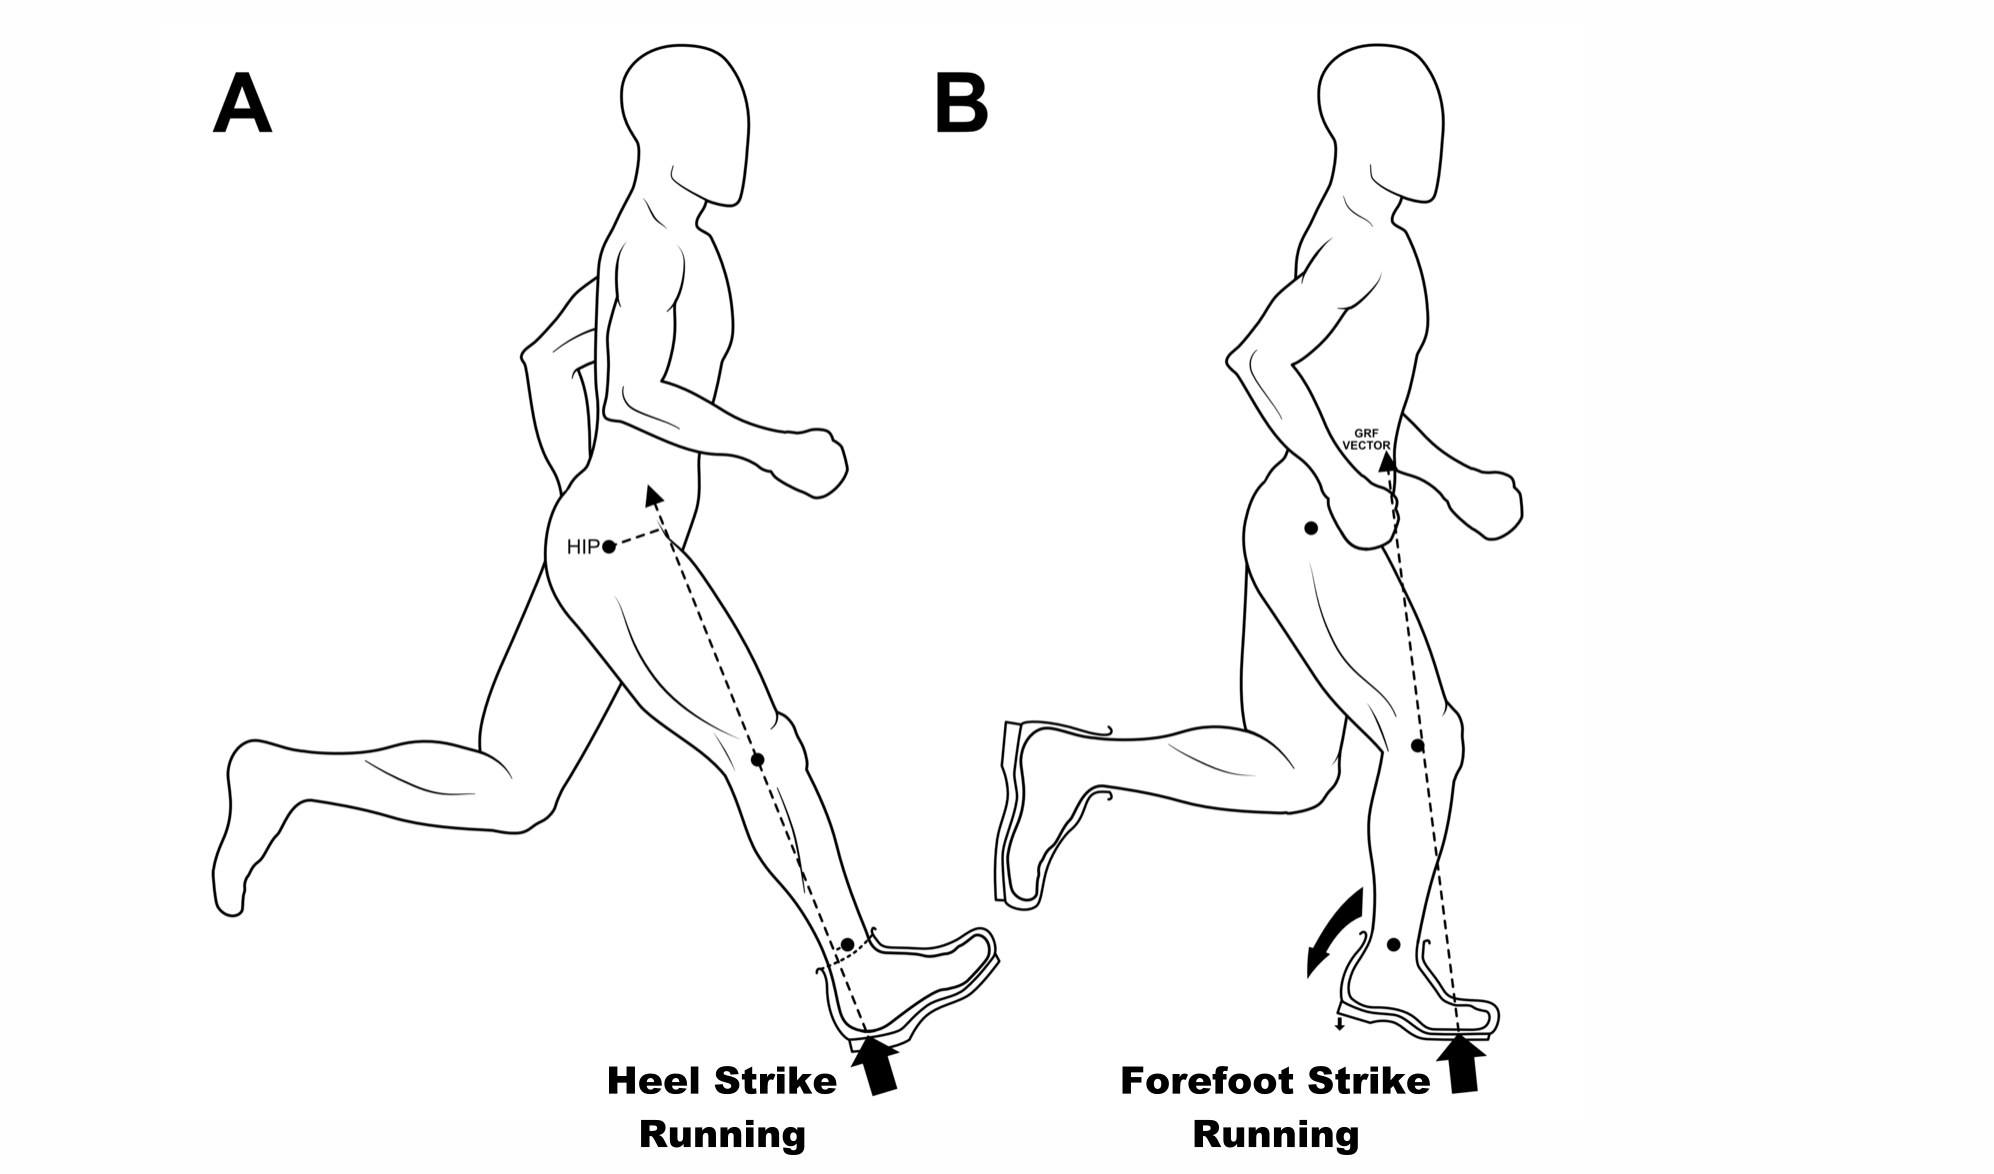 Forefoot Running is Better for Runners with Higher Arches than Heel Strike Running